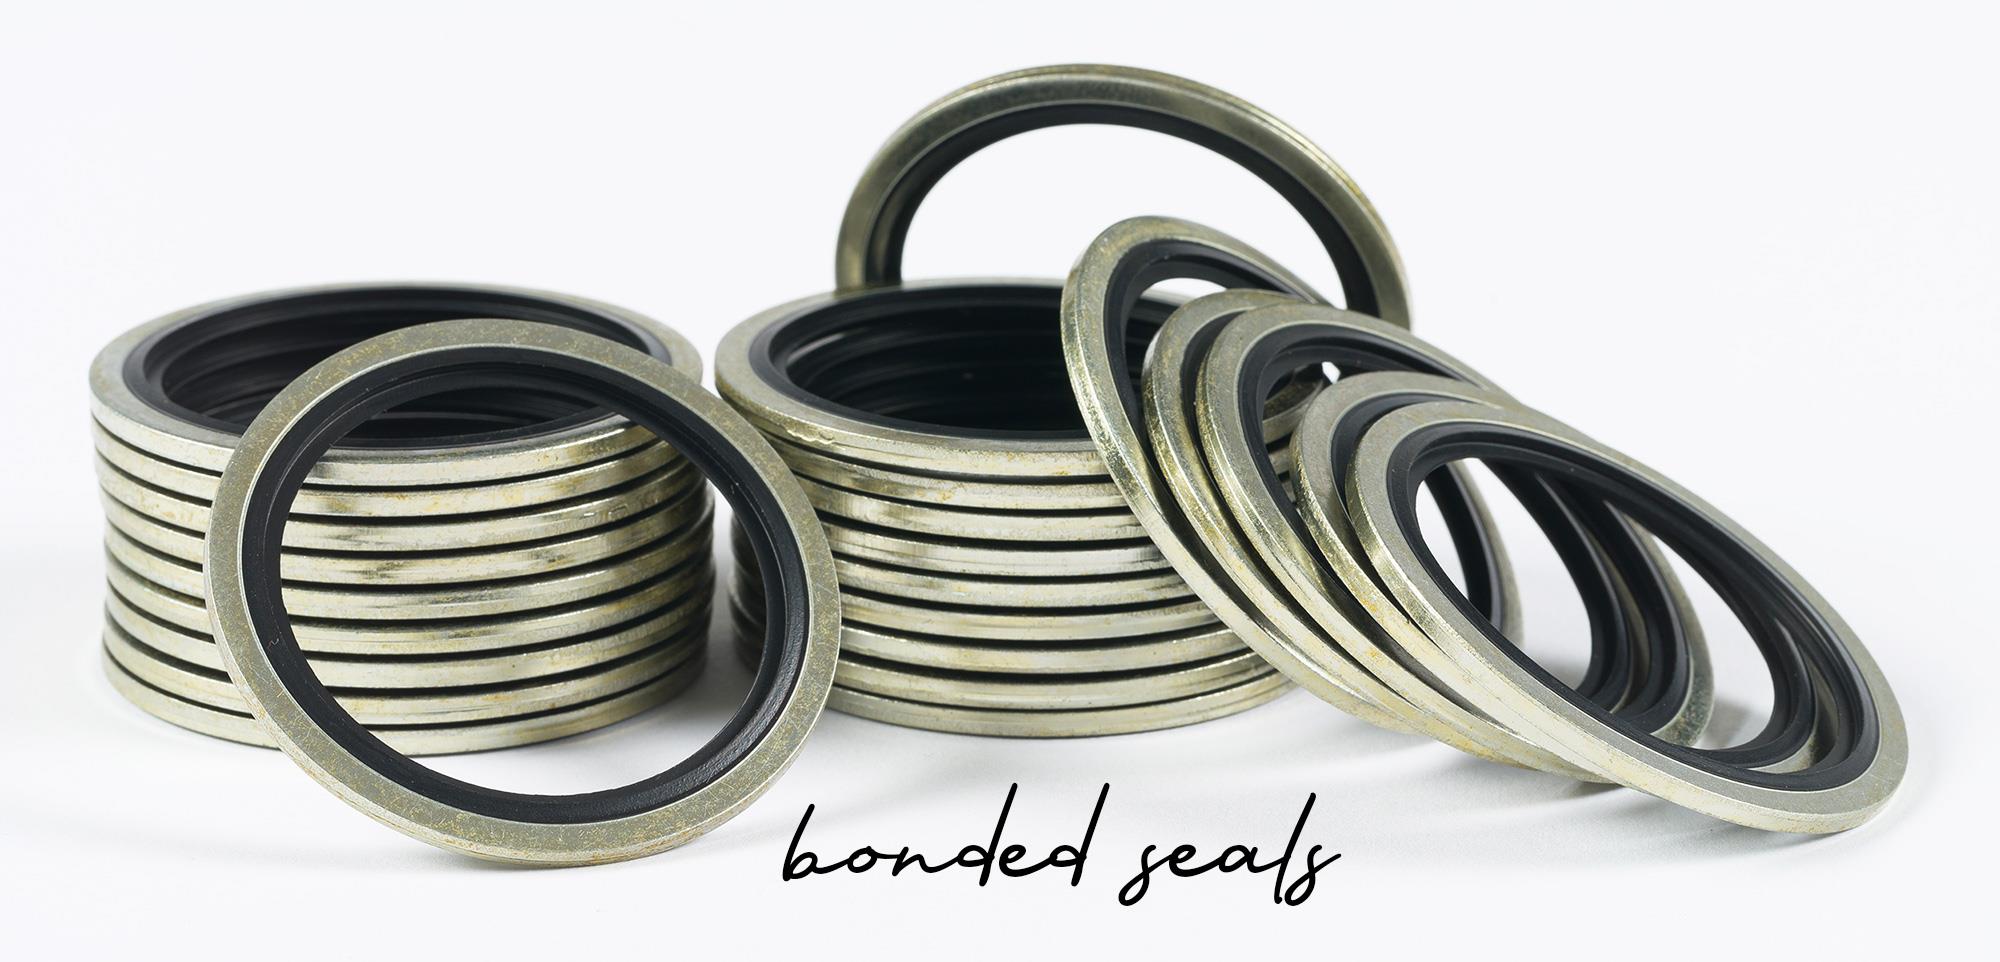 What are bonded seals?